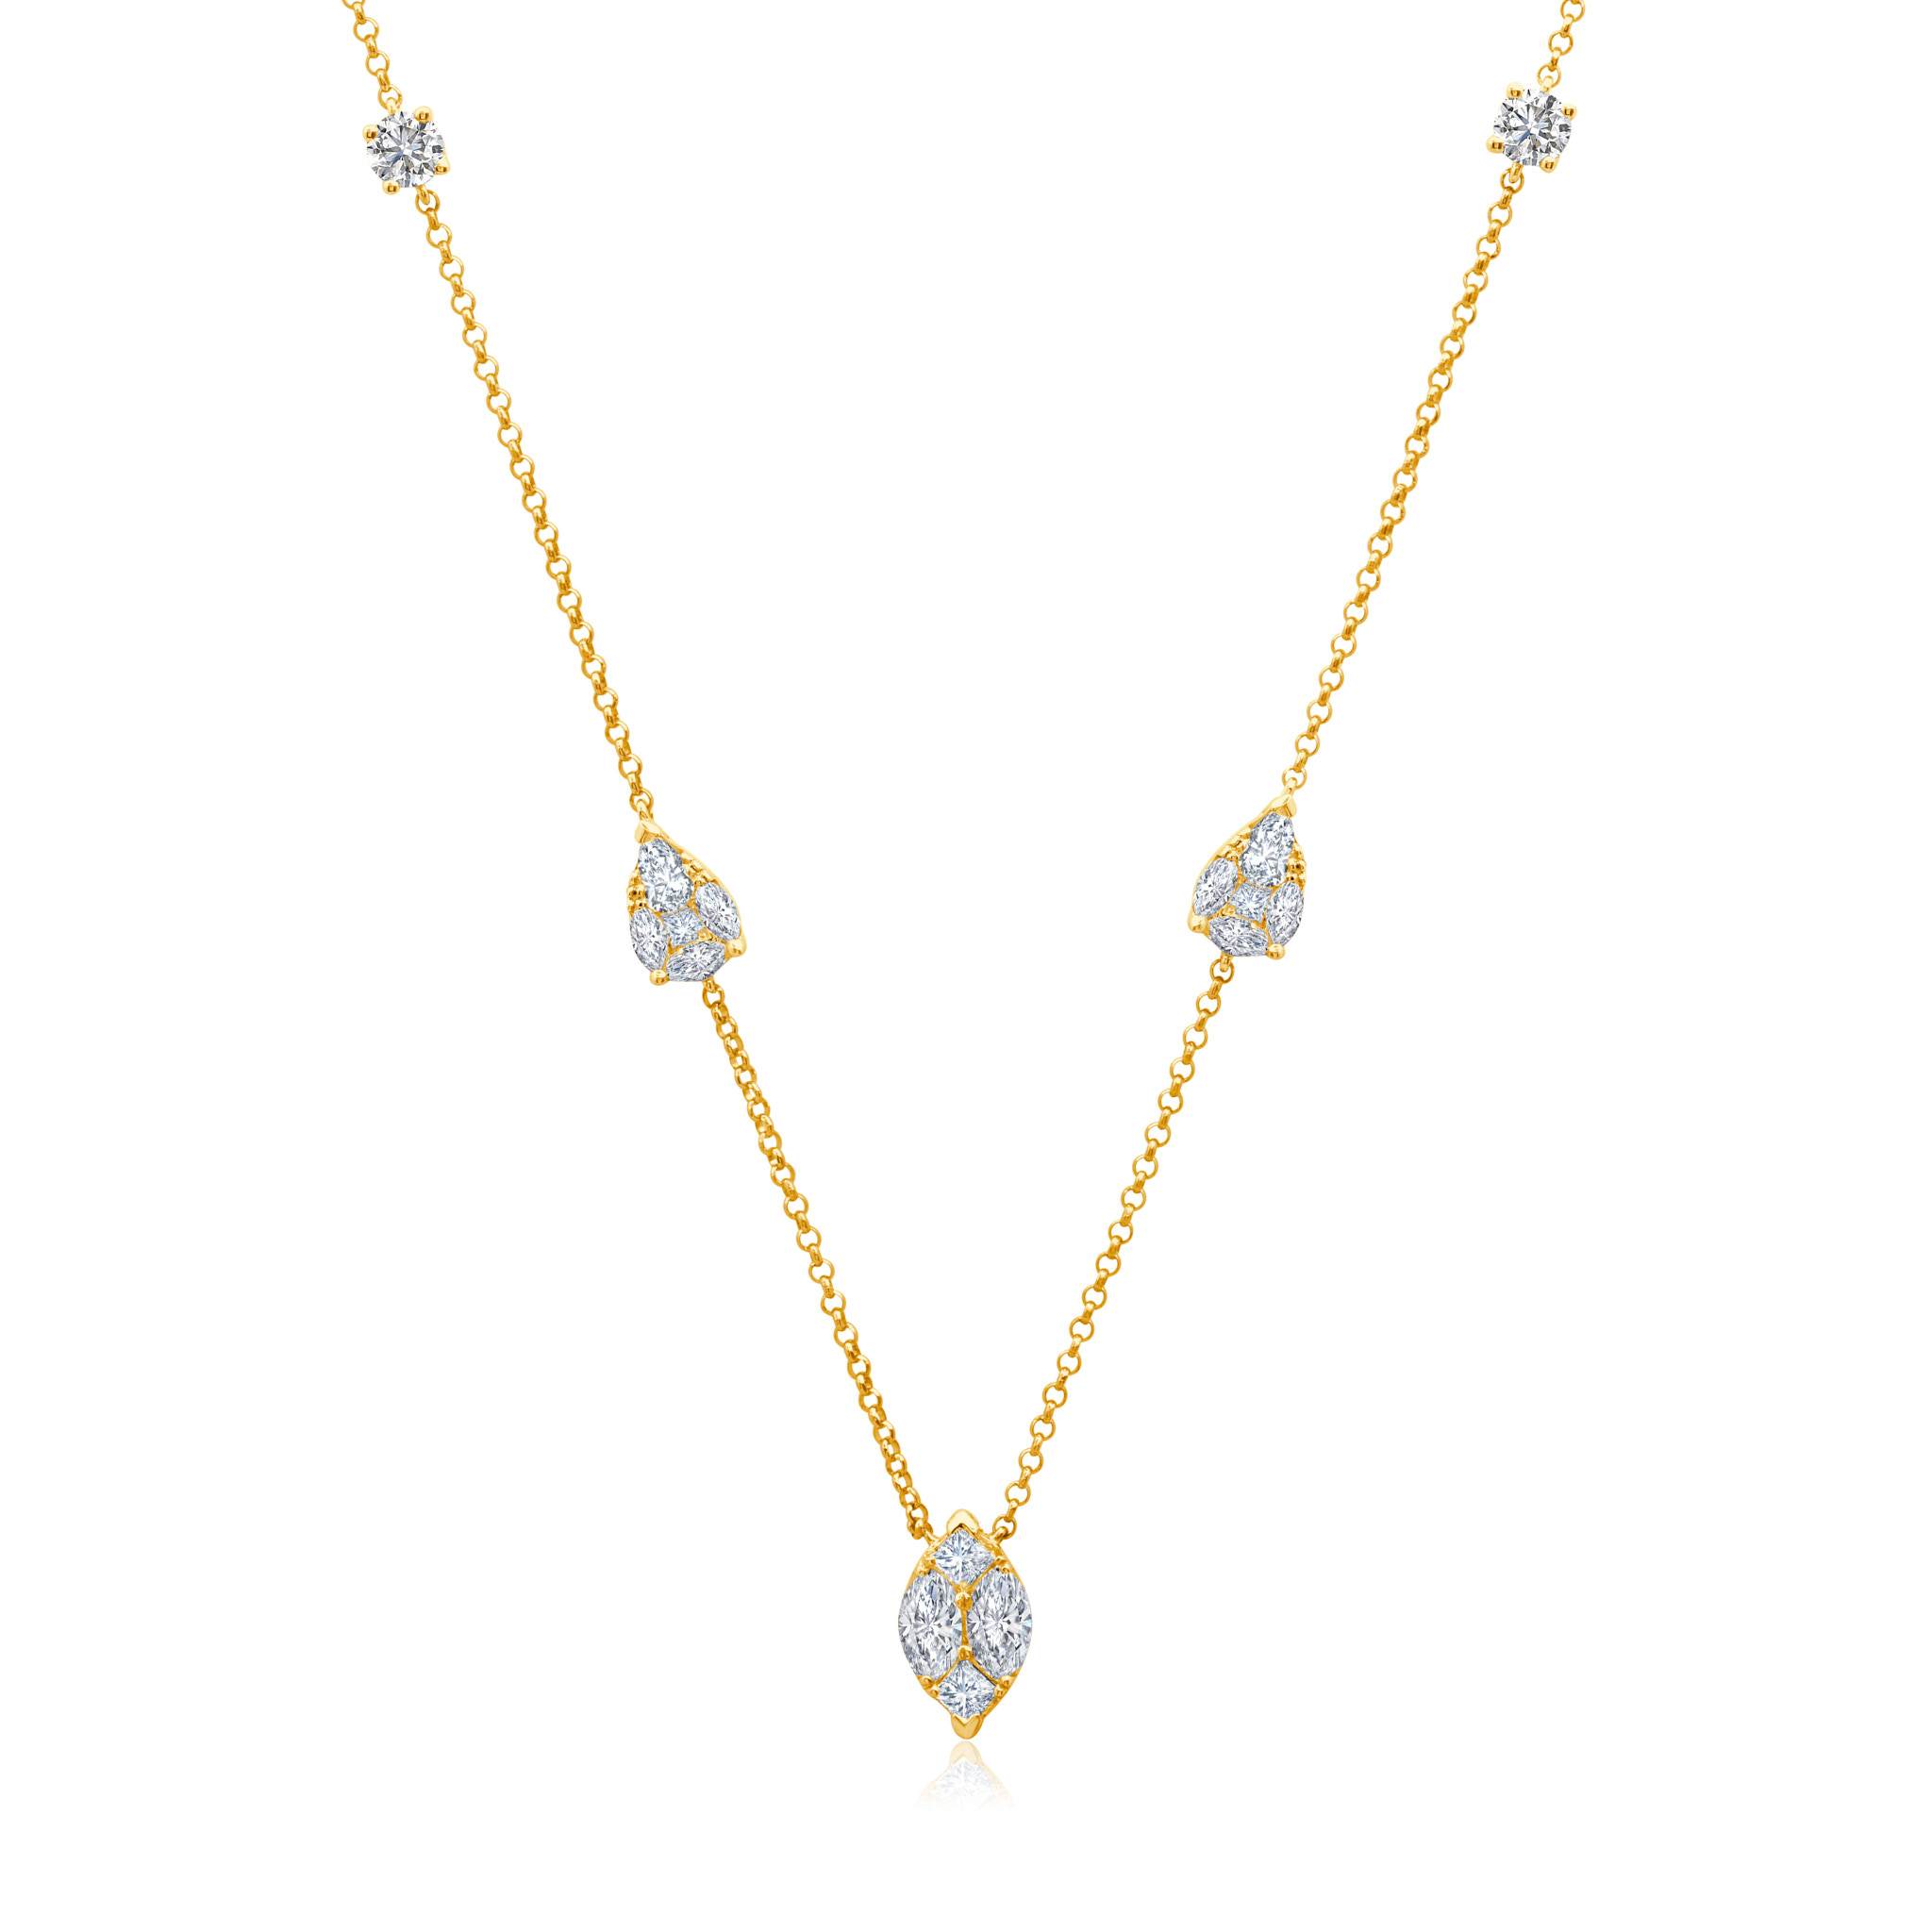 Graziela Gems - Necklace - Pear &amp; Marquise Diamond Ascension Necklace - Yellow Gold